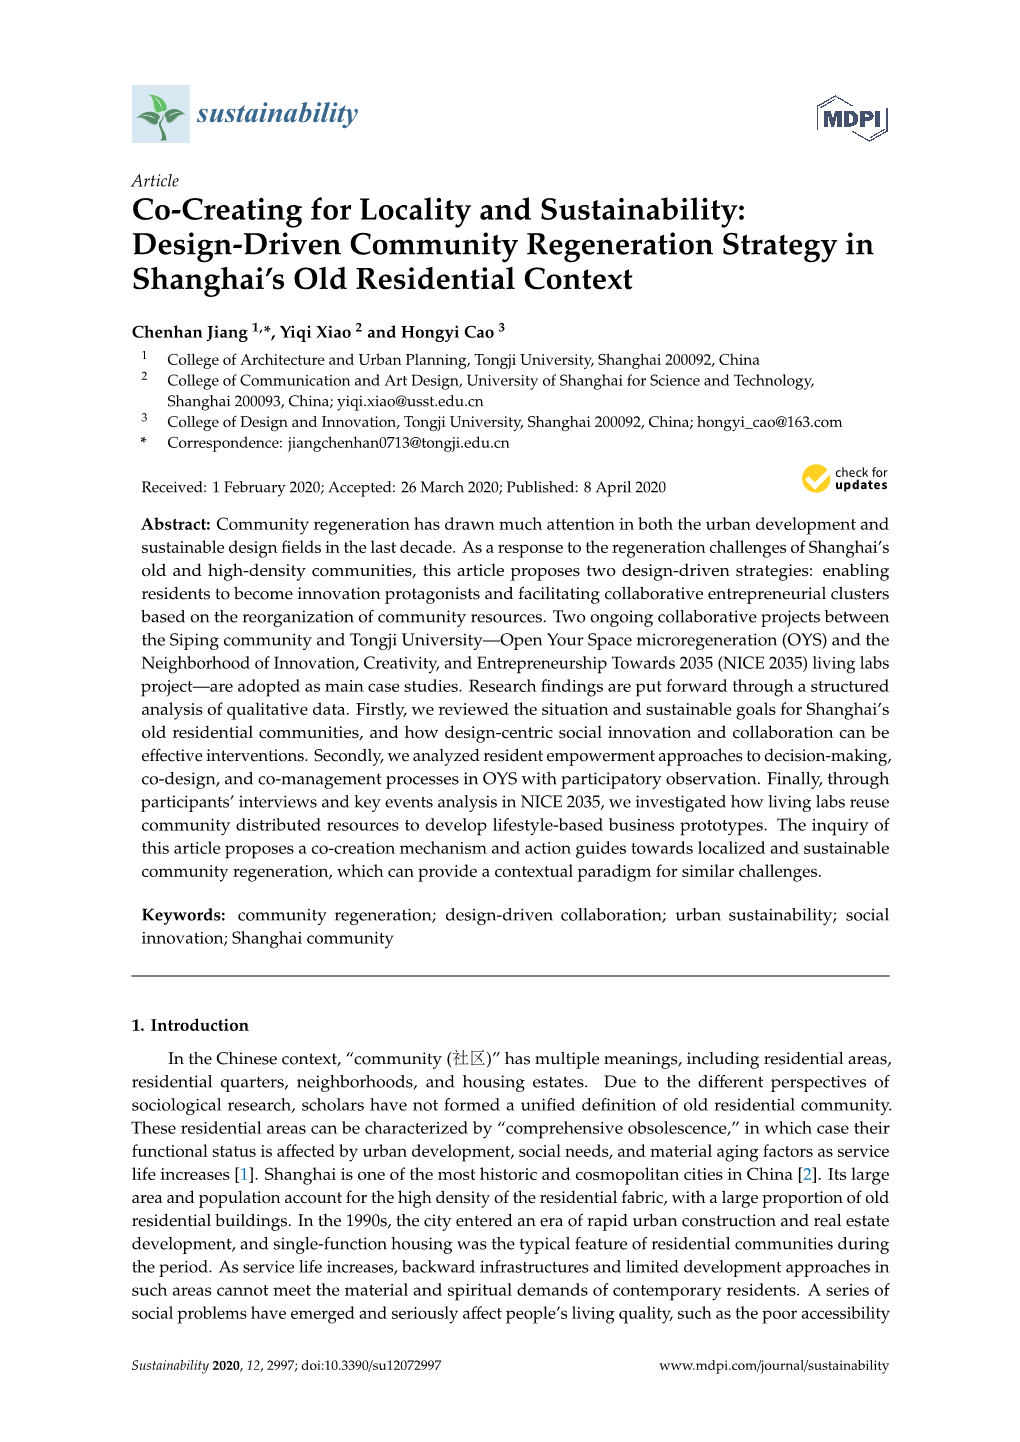 Co-Creating for Locality and Sustainability: Design-Driven Community Regeneration Strategy in Shanghai’S Old Residential Context